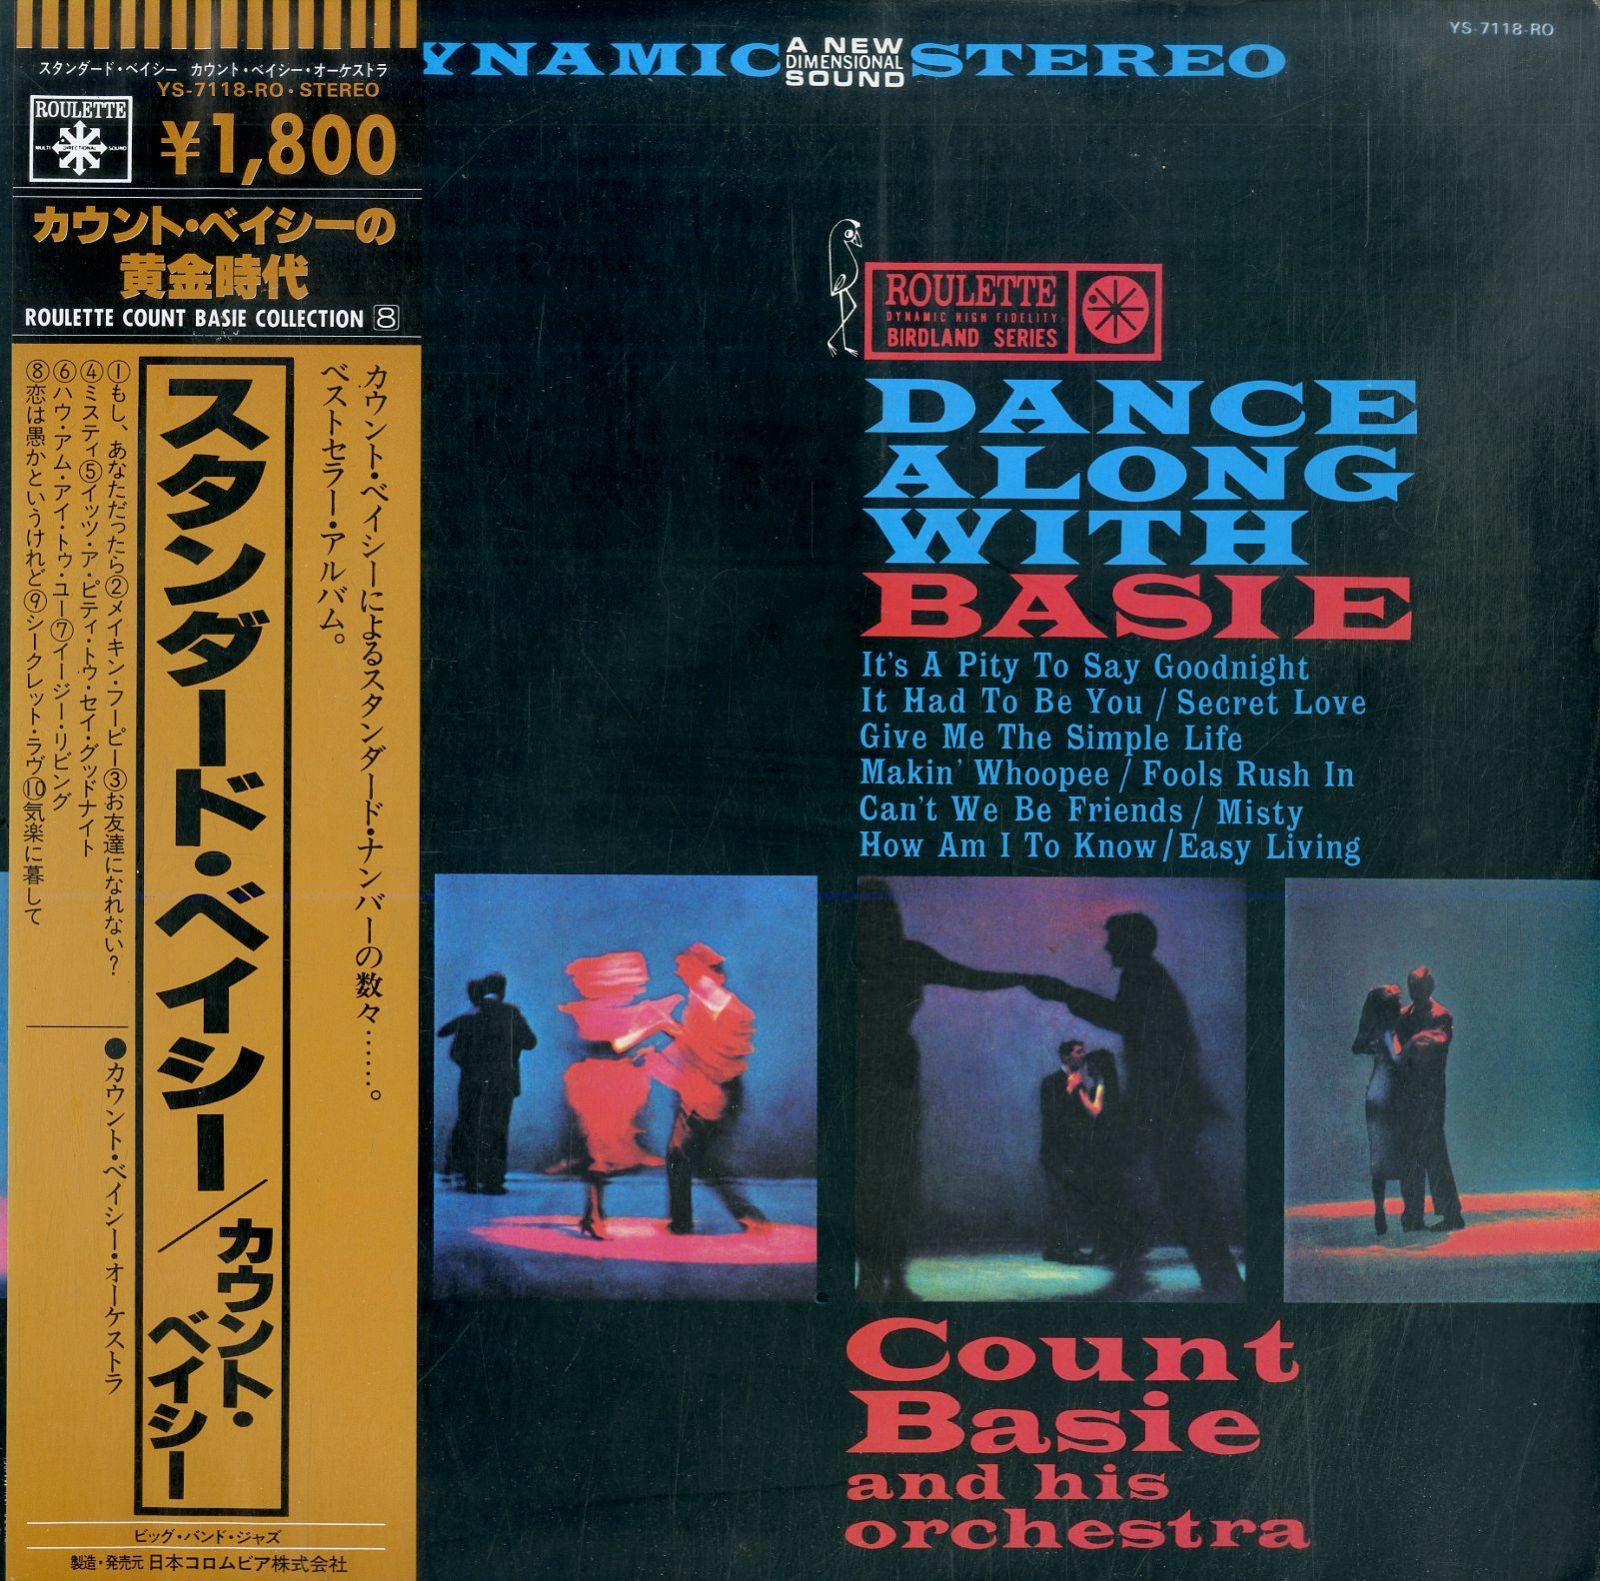 LP1枚 / カウント・ベイシー (COUNT BASIE) / Dance Along With Basie 